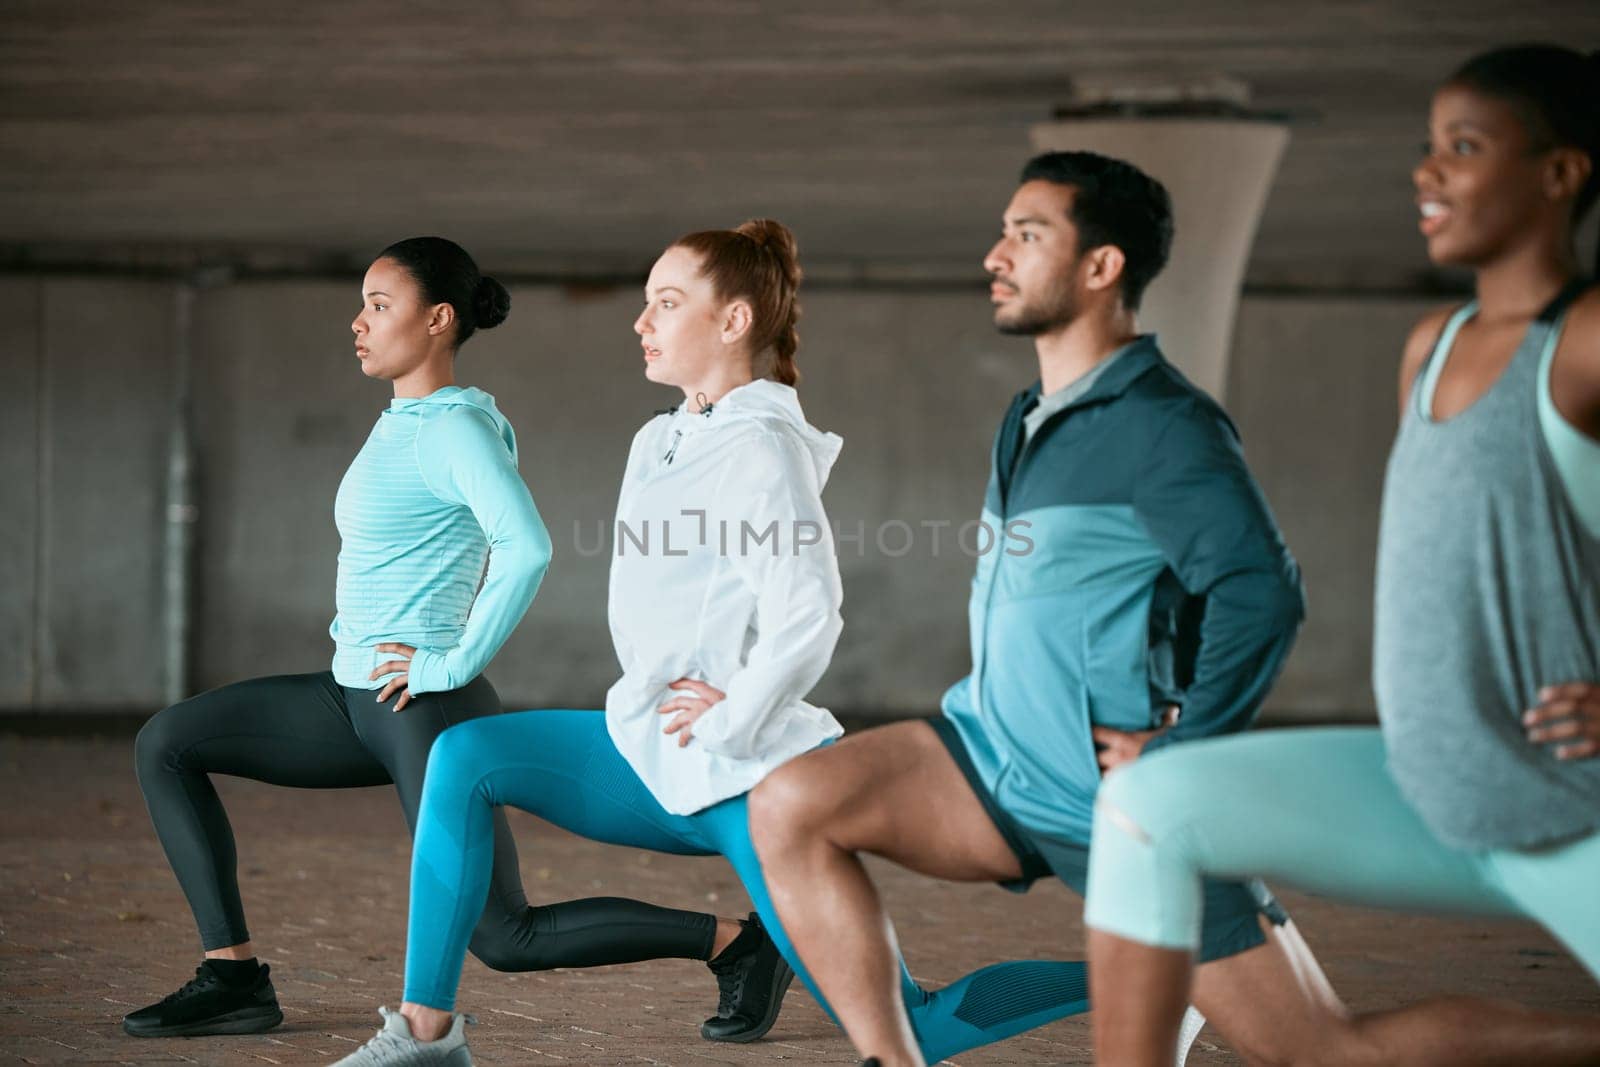 Friends, workout and people stretching as a fitness club for sports, health and wellness in an urban class together. Sport, commitment and group training or team doing pilates exercise in yoga by YuriArcurs